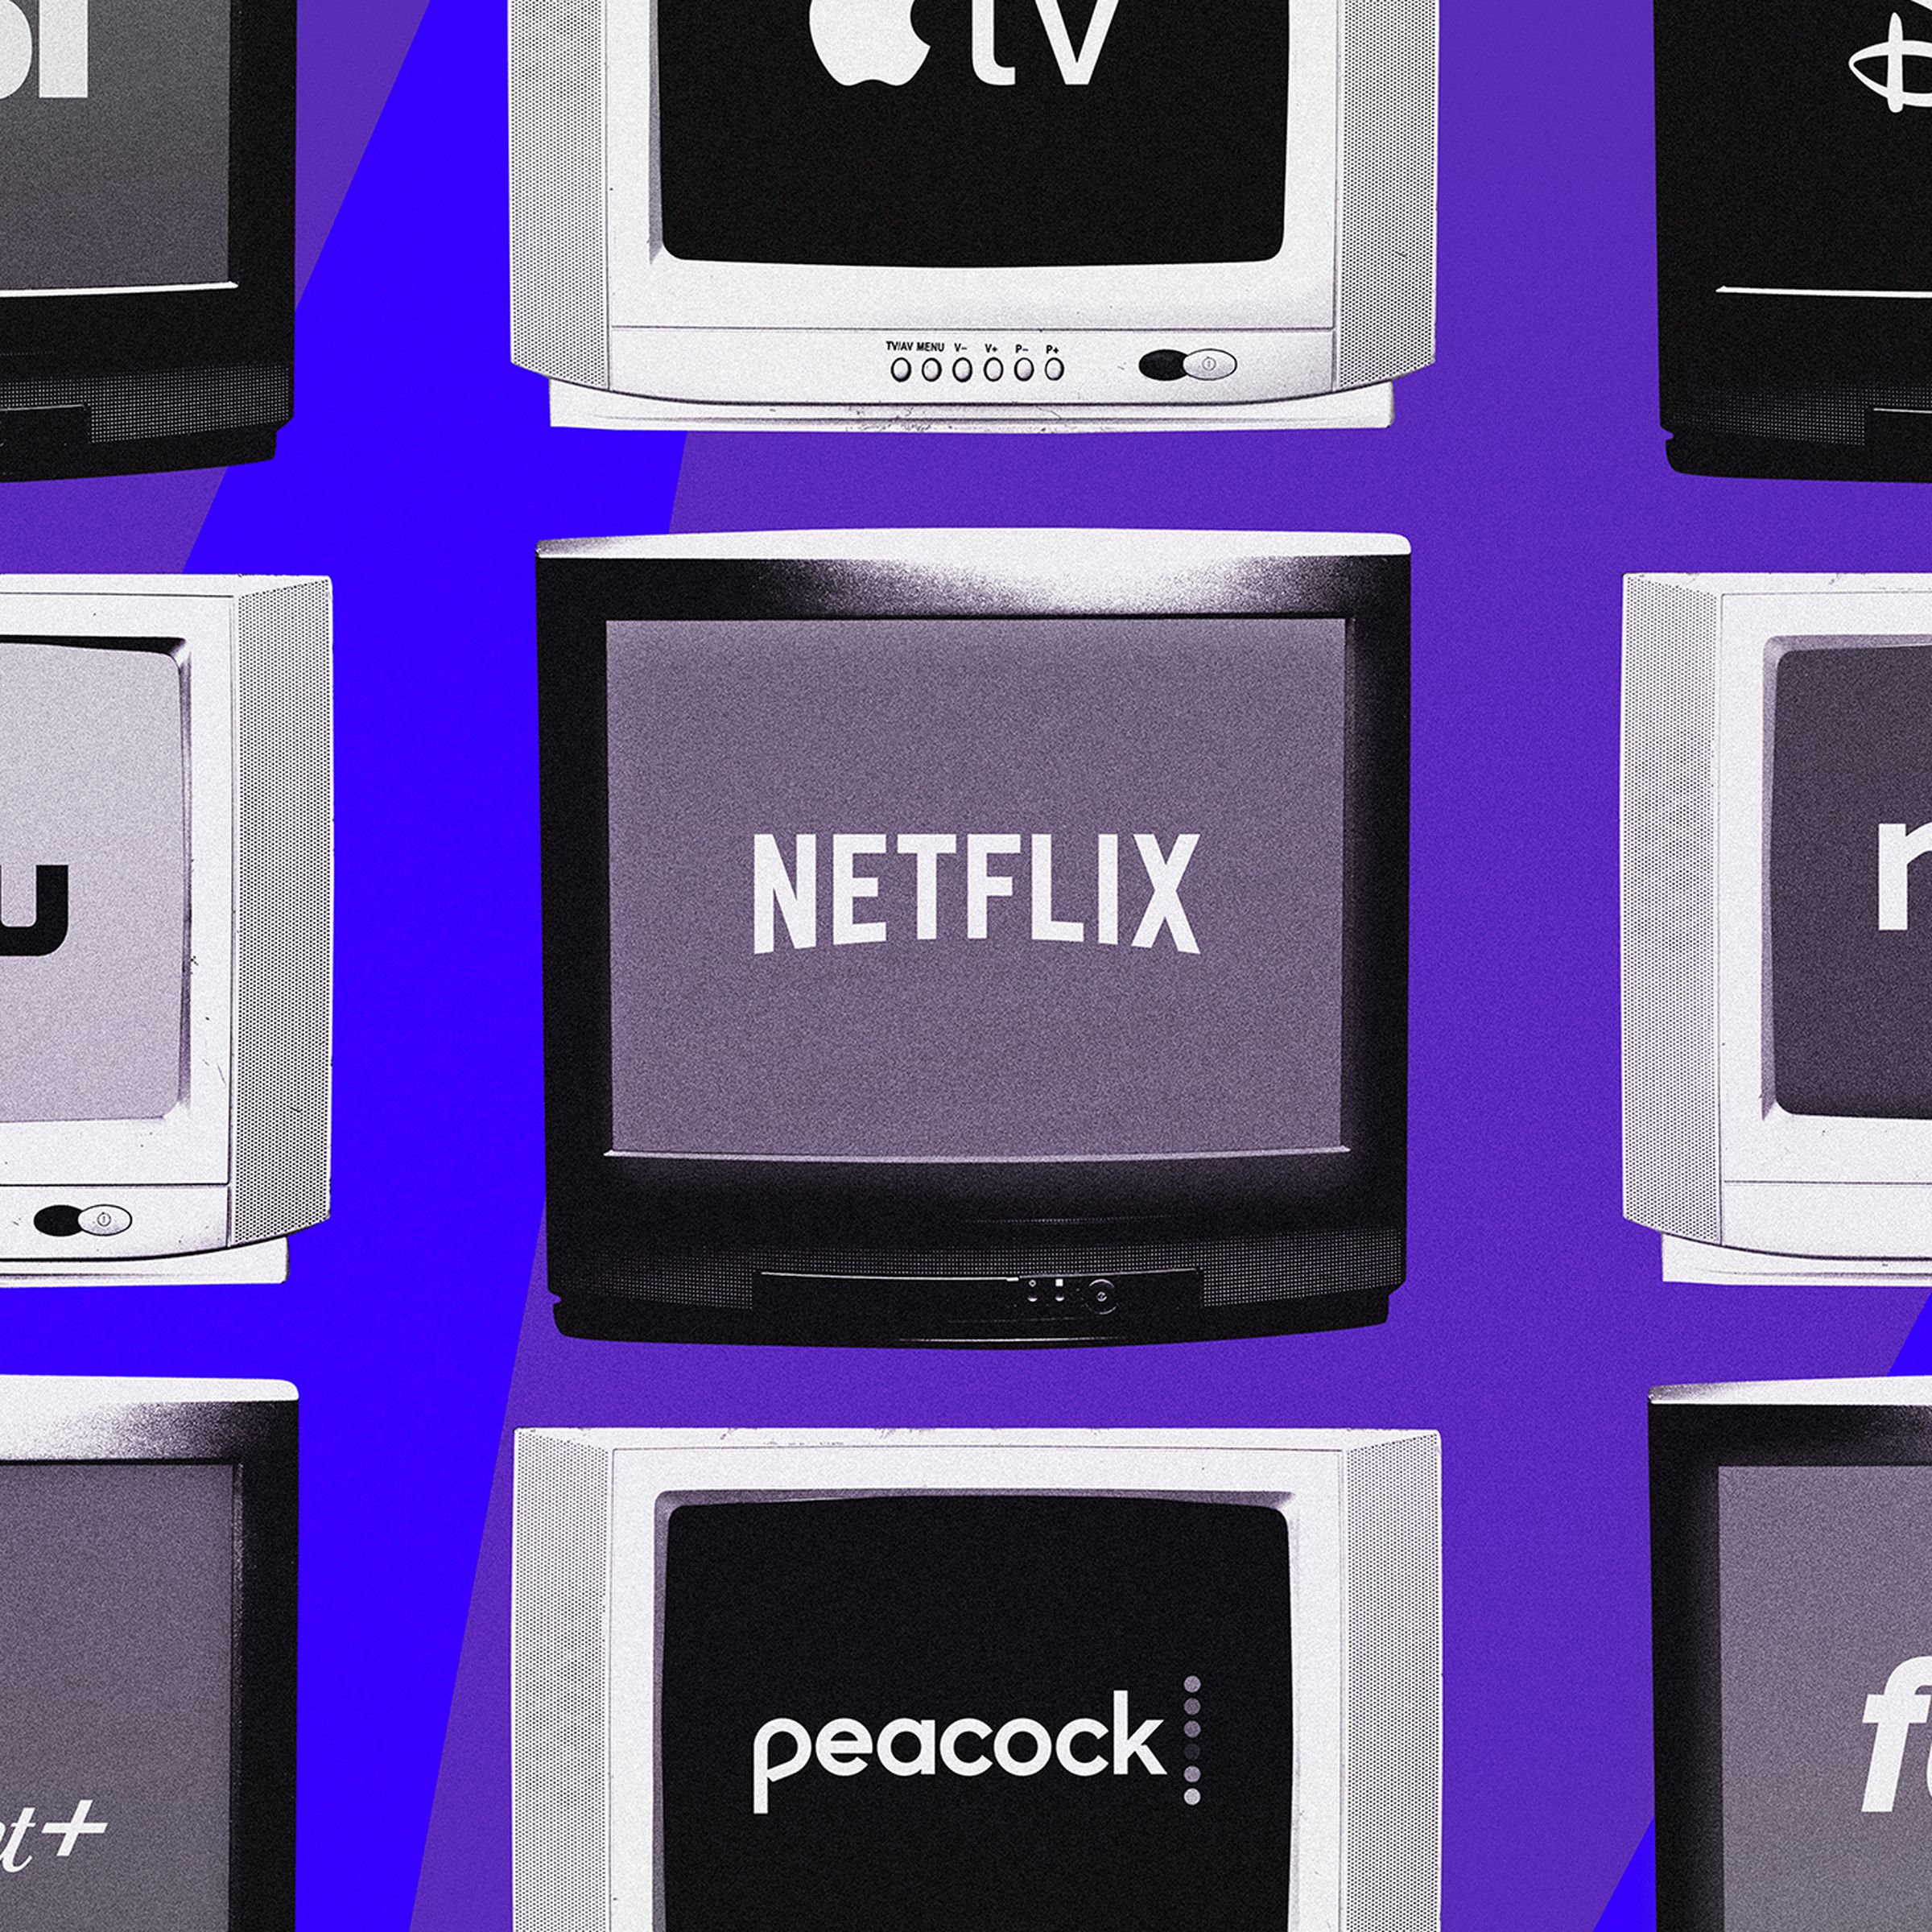 a graphic of multiple TVs displaying streaming service logos